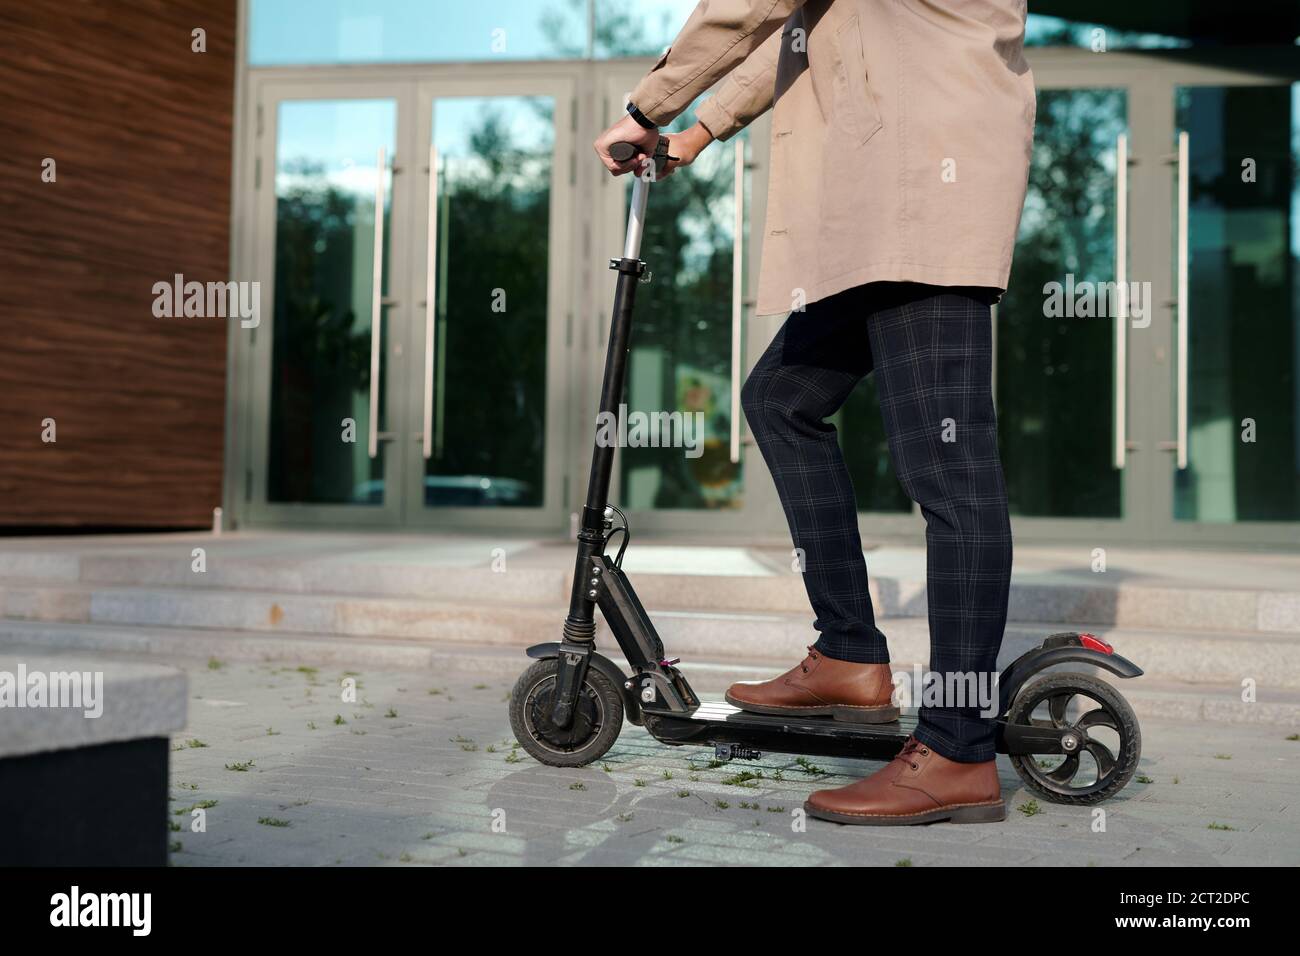 Low section of businessman in trenchcoat and pants holding by handles of scooter Stock Photo